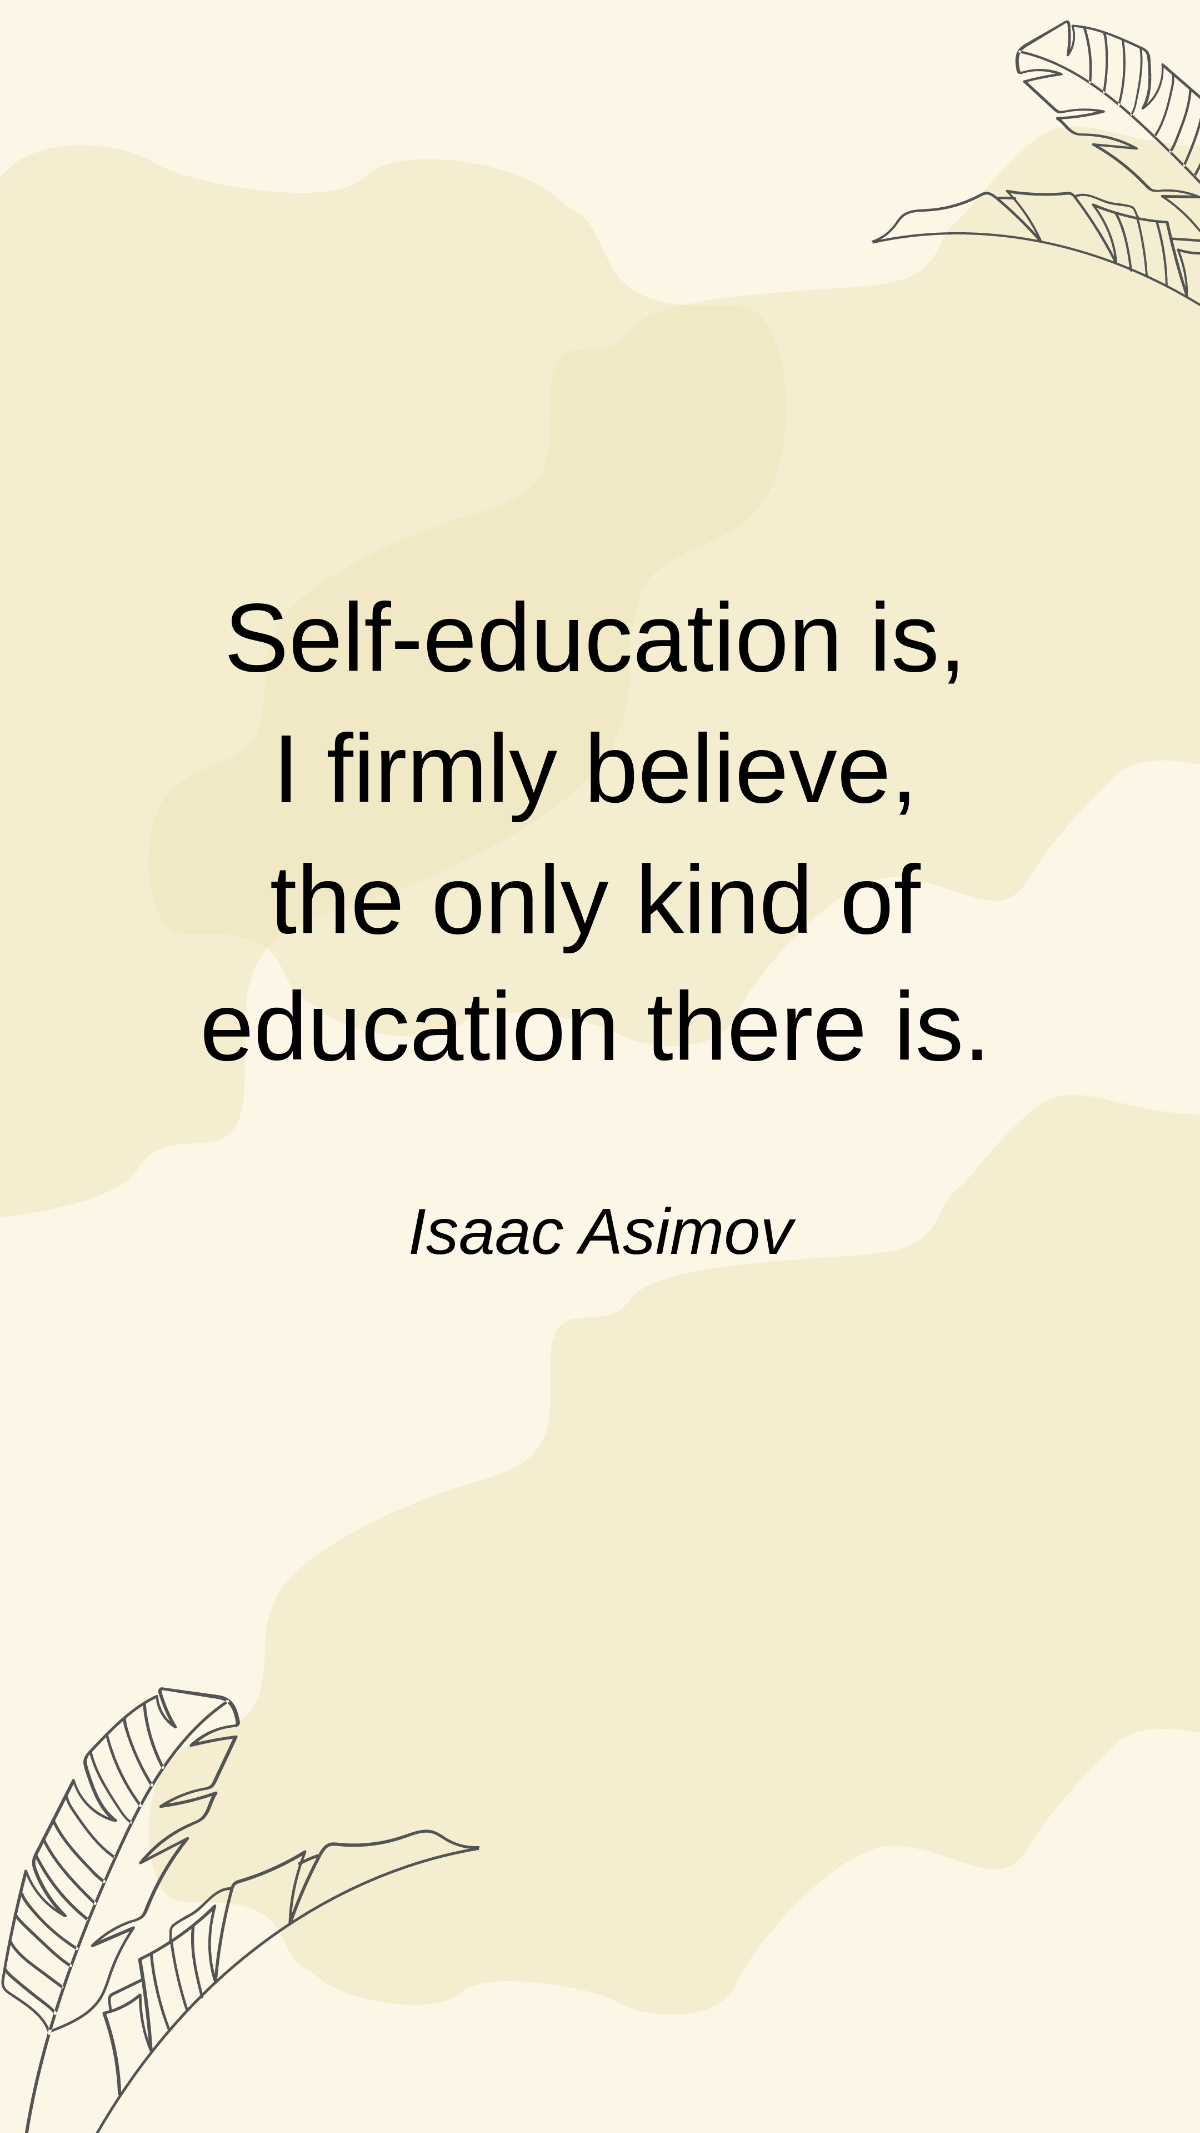 Isaac Asimov - Self-education is, I firmly believe, the only kind of education there is.